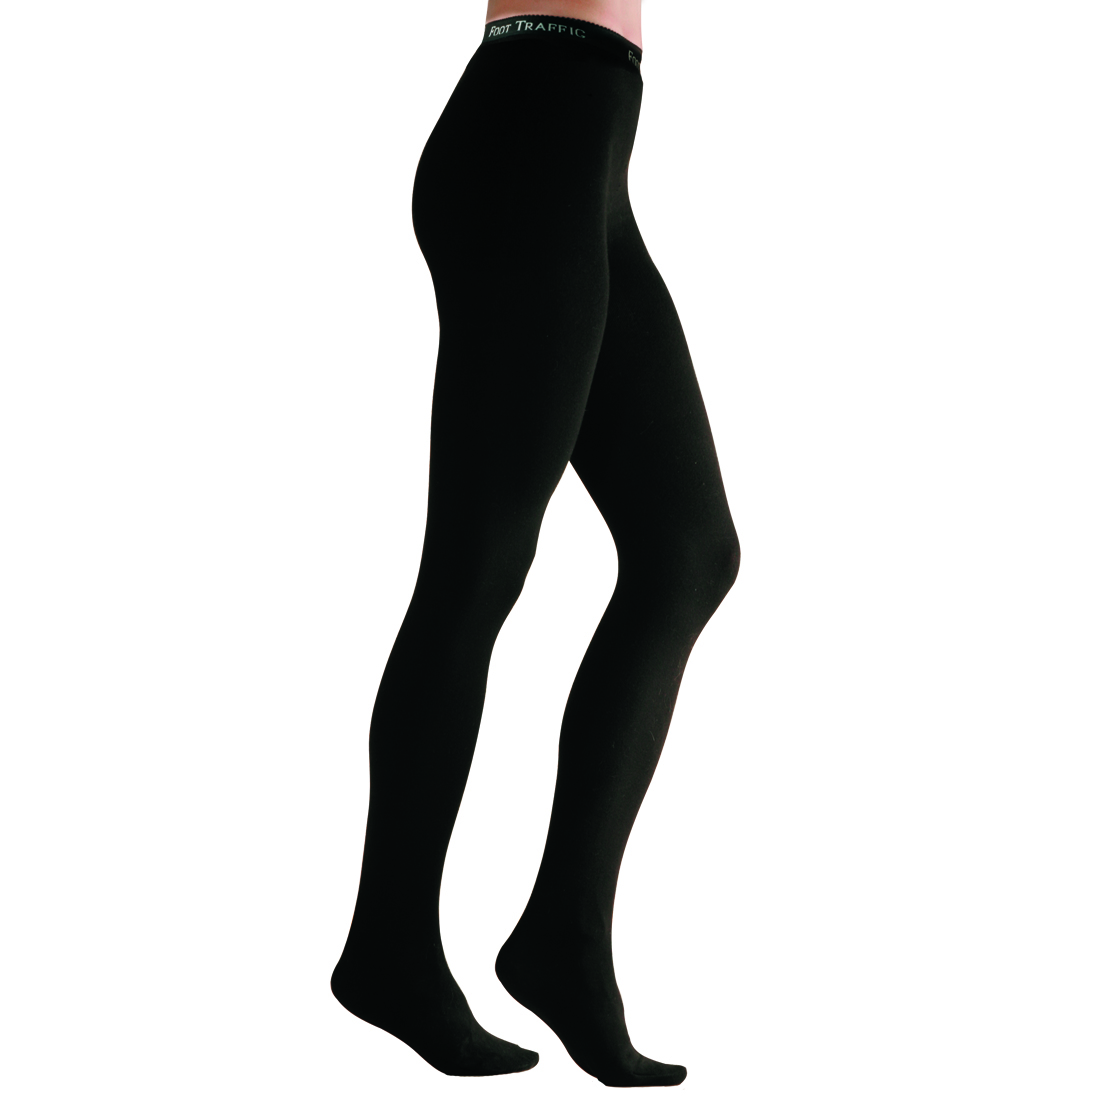 Buy Quality Tights for Women - Hosiery Online | Foot Traffic